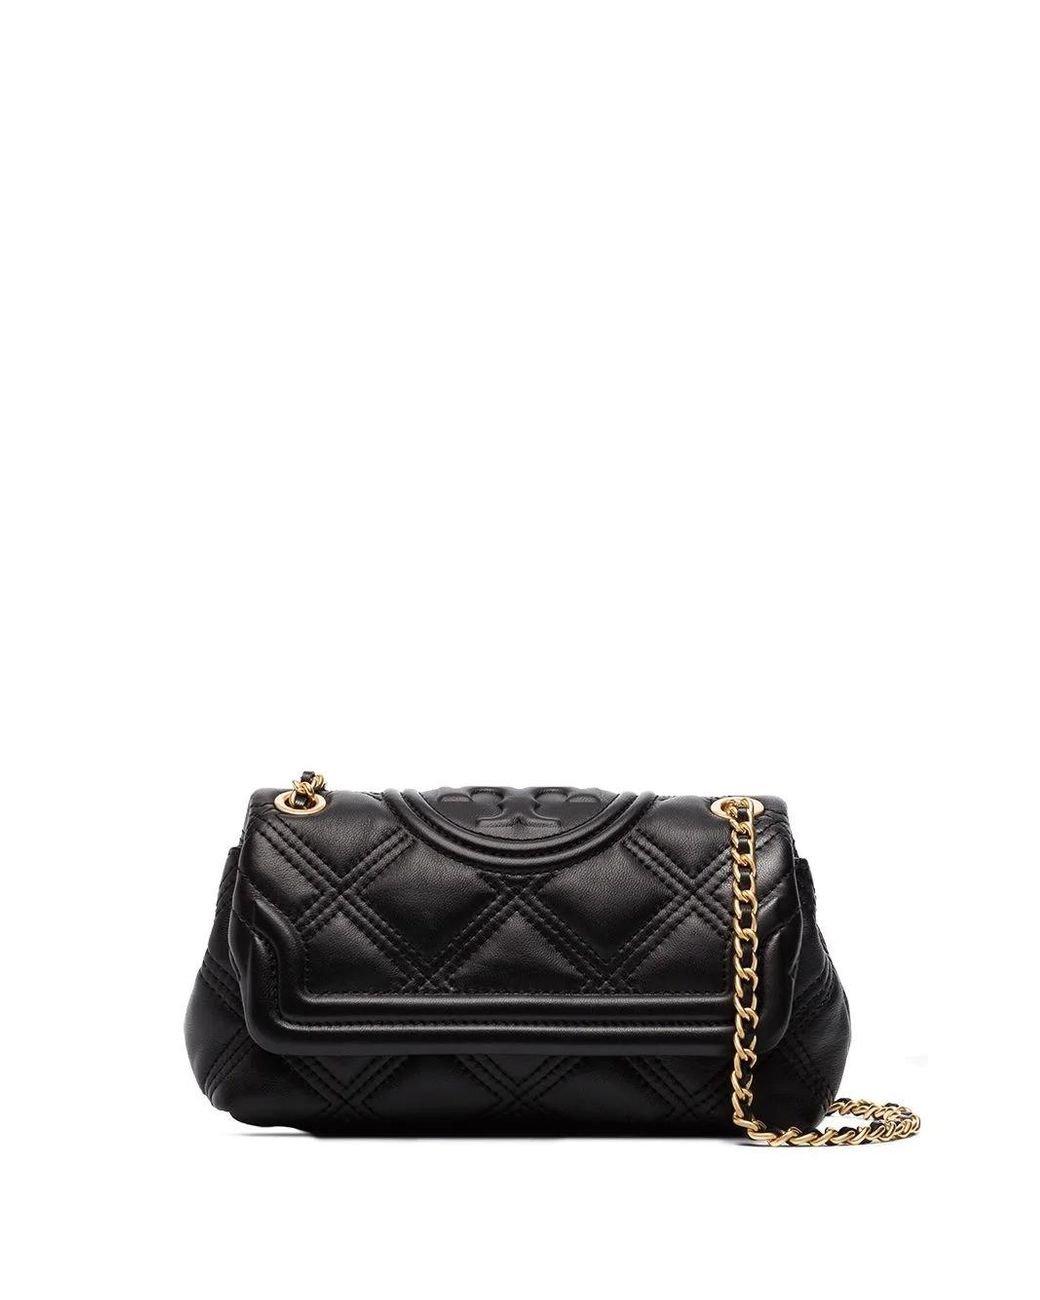 Tory Burch Diamond-quilted Leather Shoulder Bag in Black | Lyst